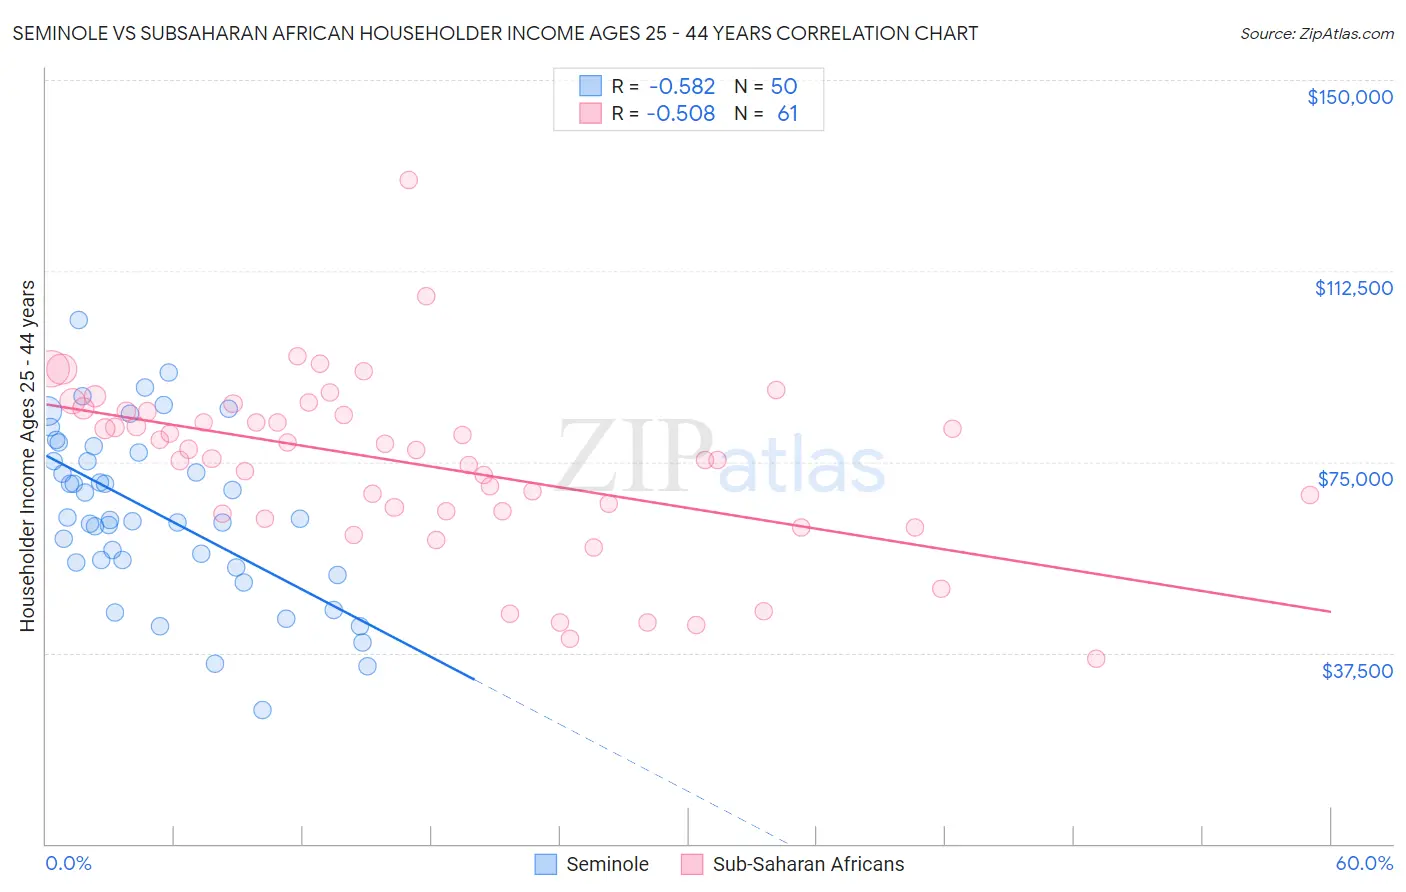 Seminole vs Subsaharan African Householder Income Ages 25 - 44 years